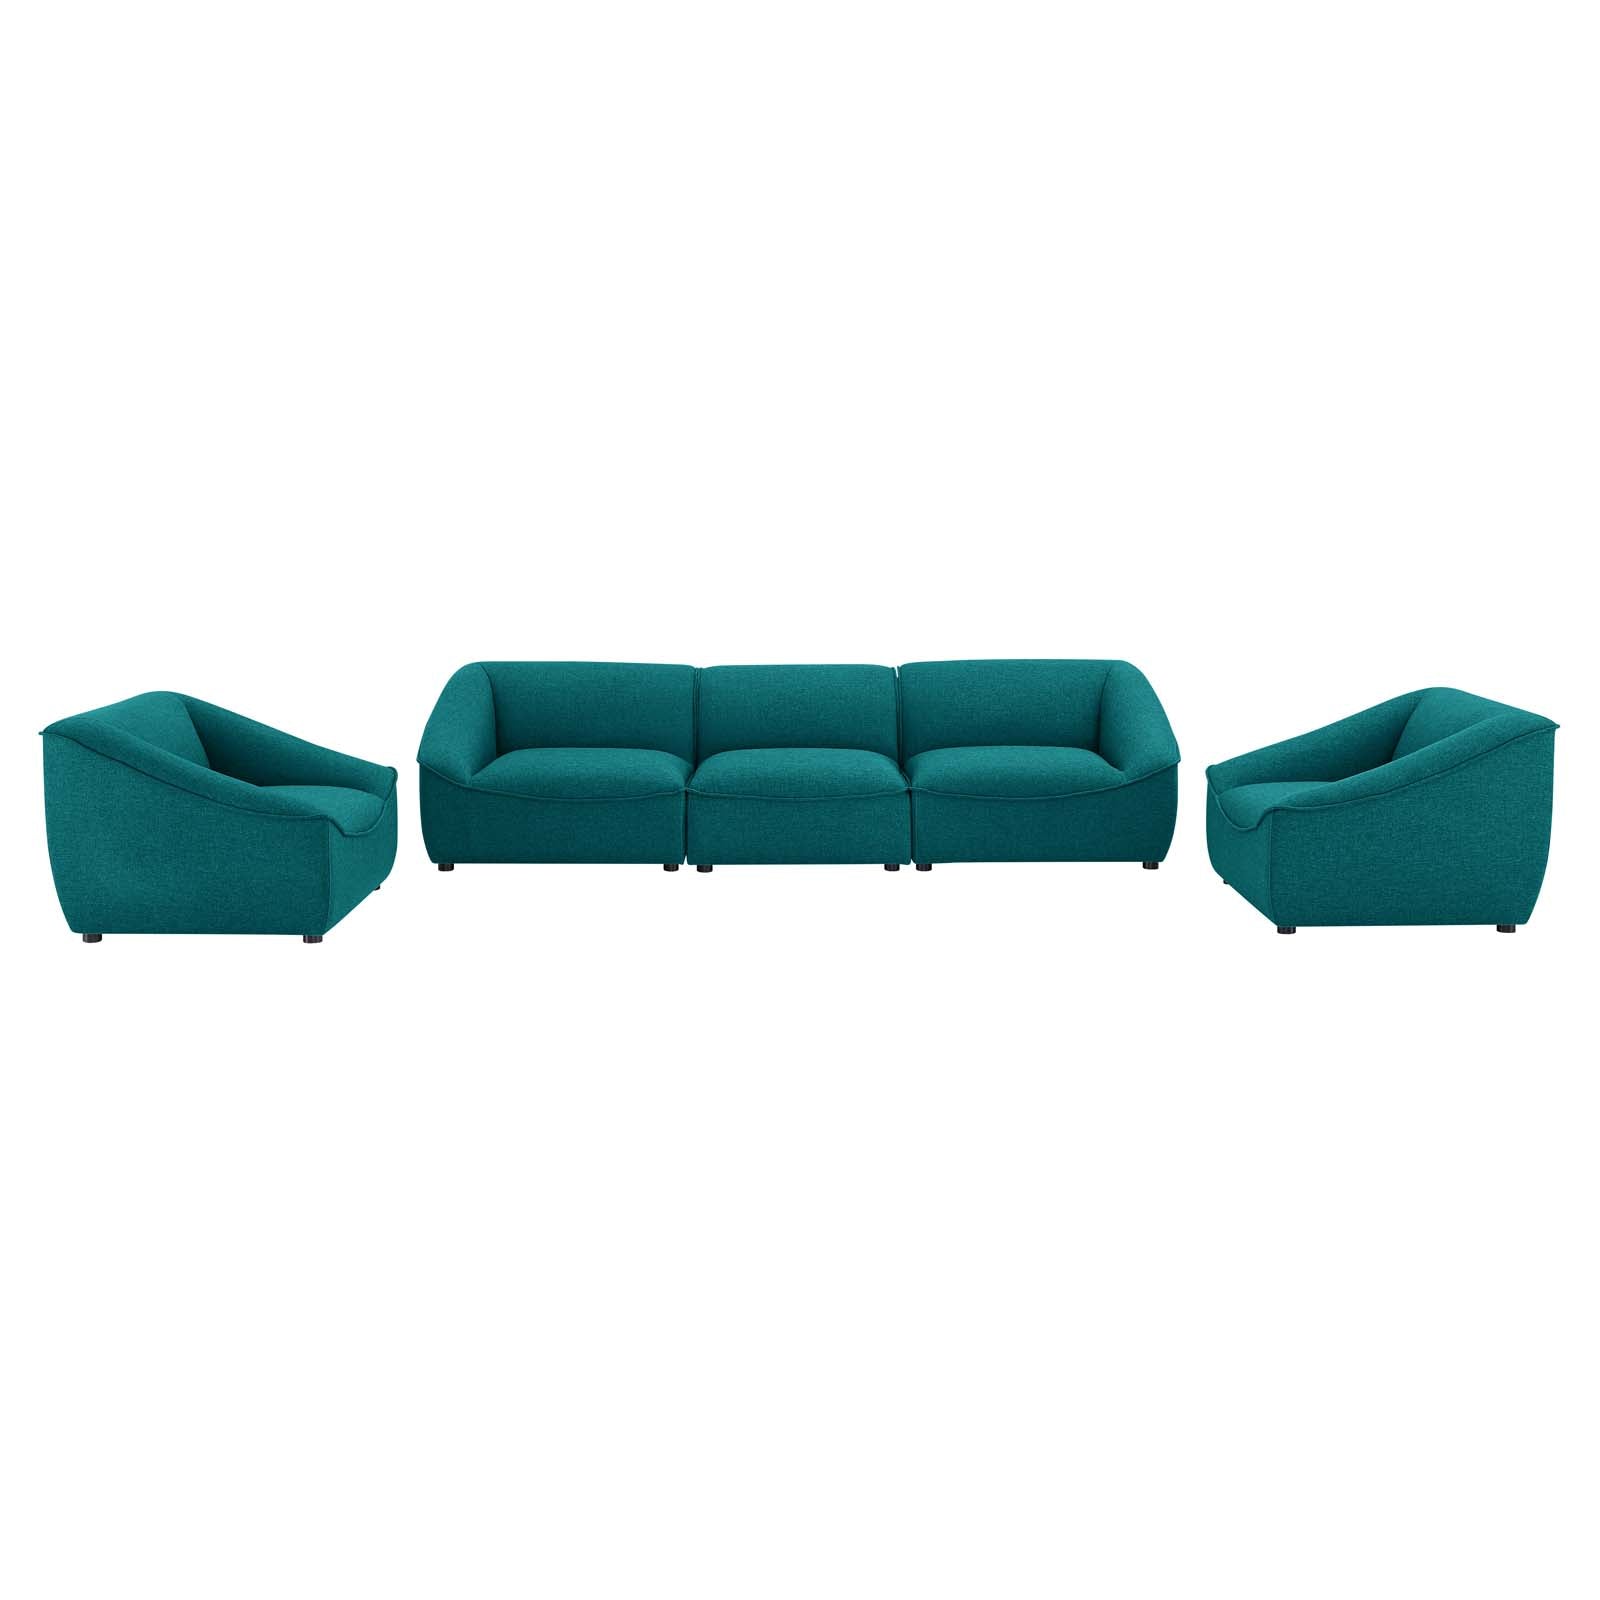 Comprise 5-Piece Living Room Set - East Shore Modern Home Furnishings